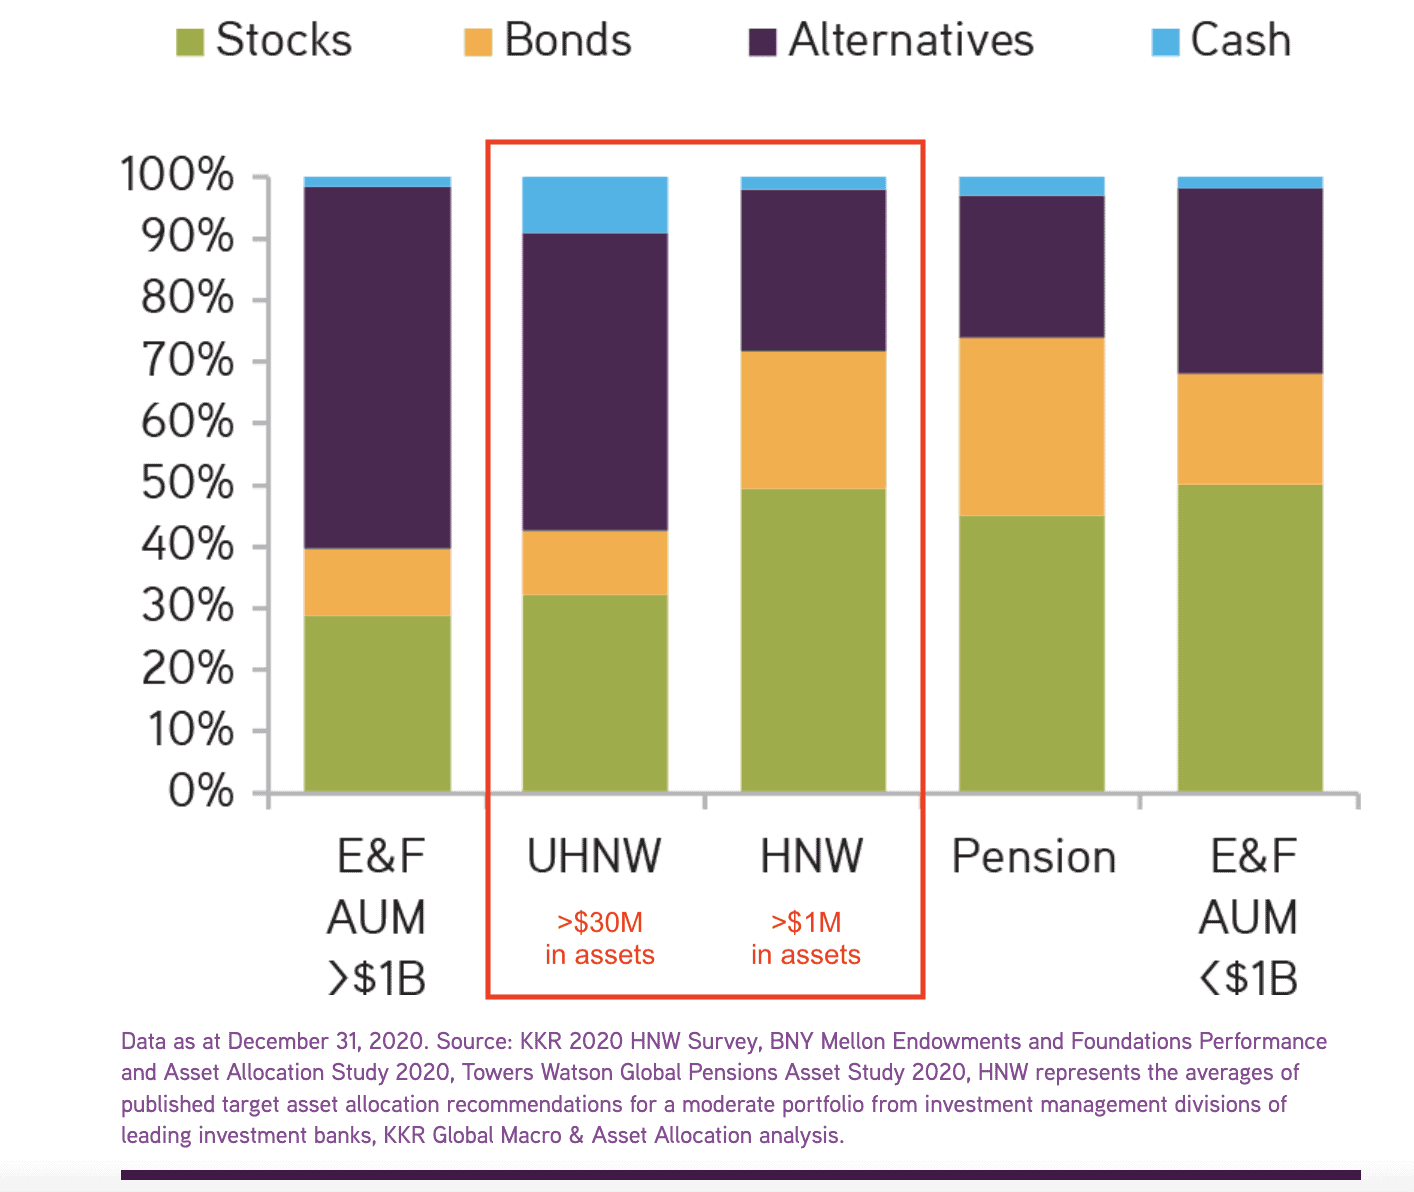 Chart showing asset allocation by investor type from a 2020 KKR report.